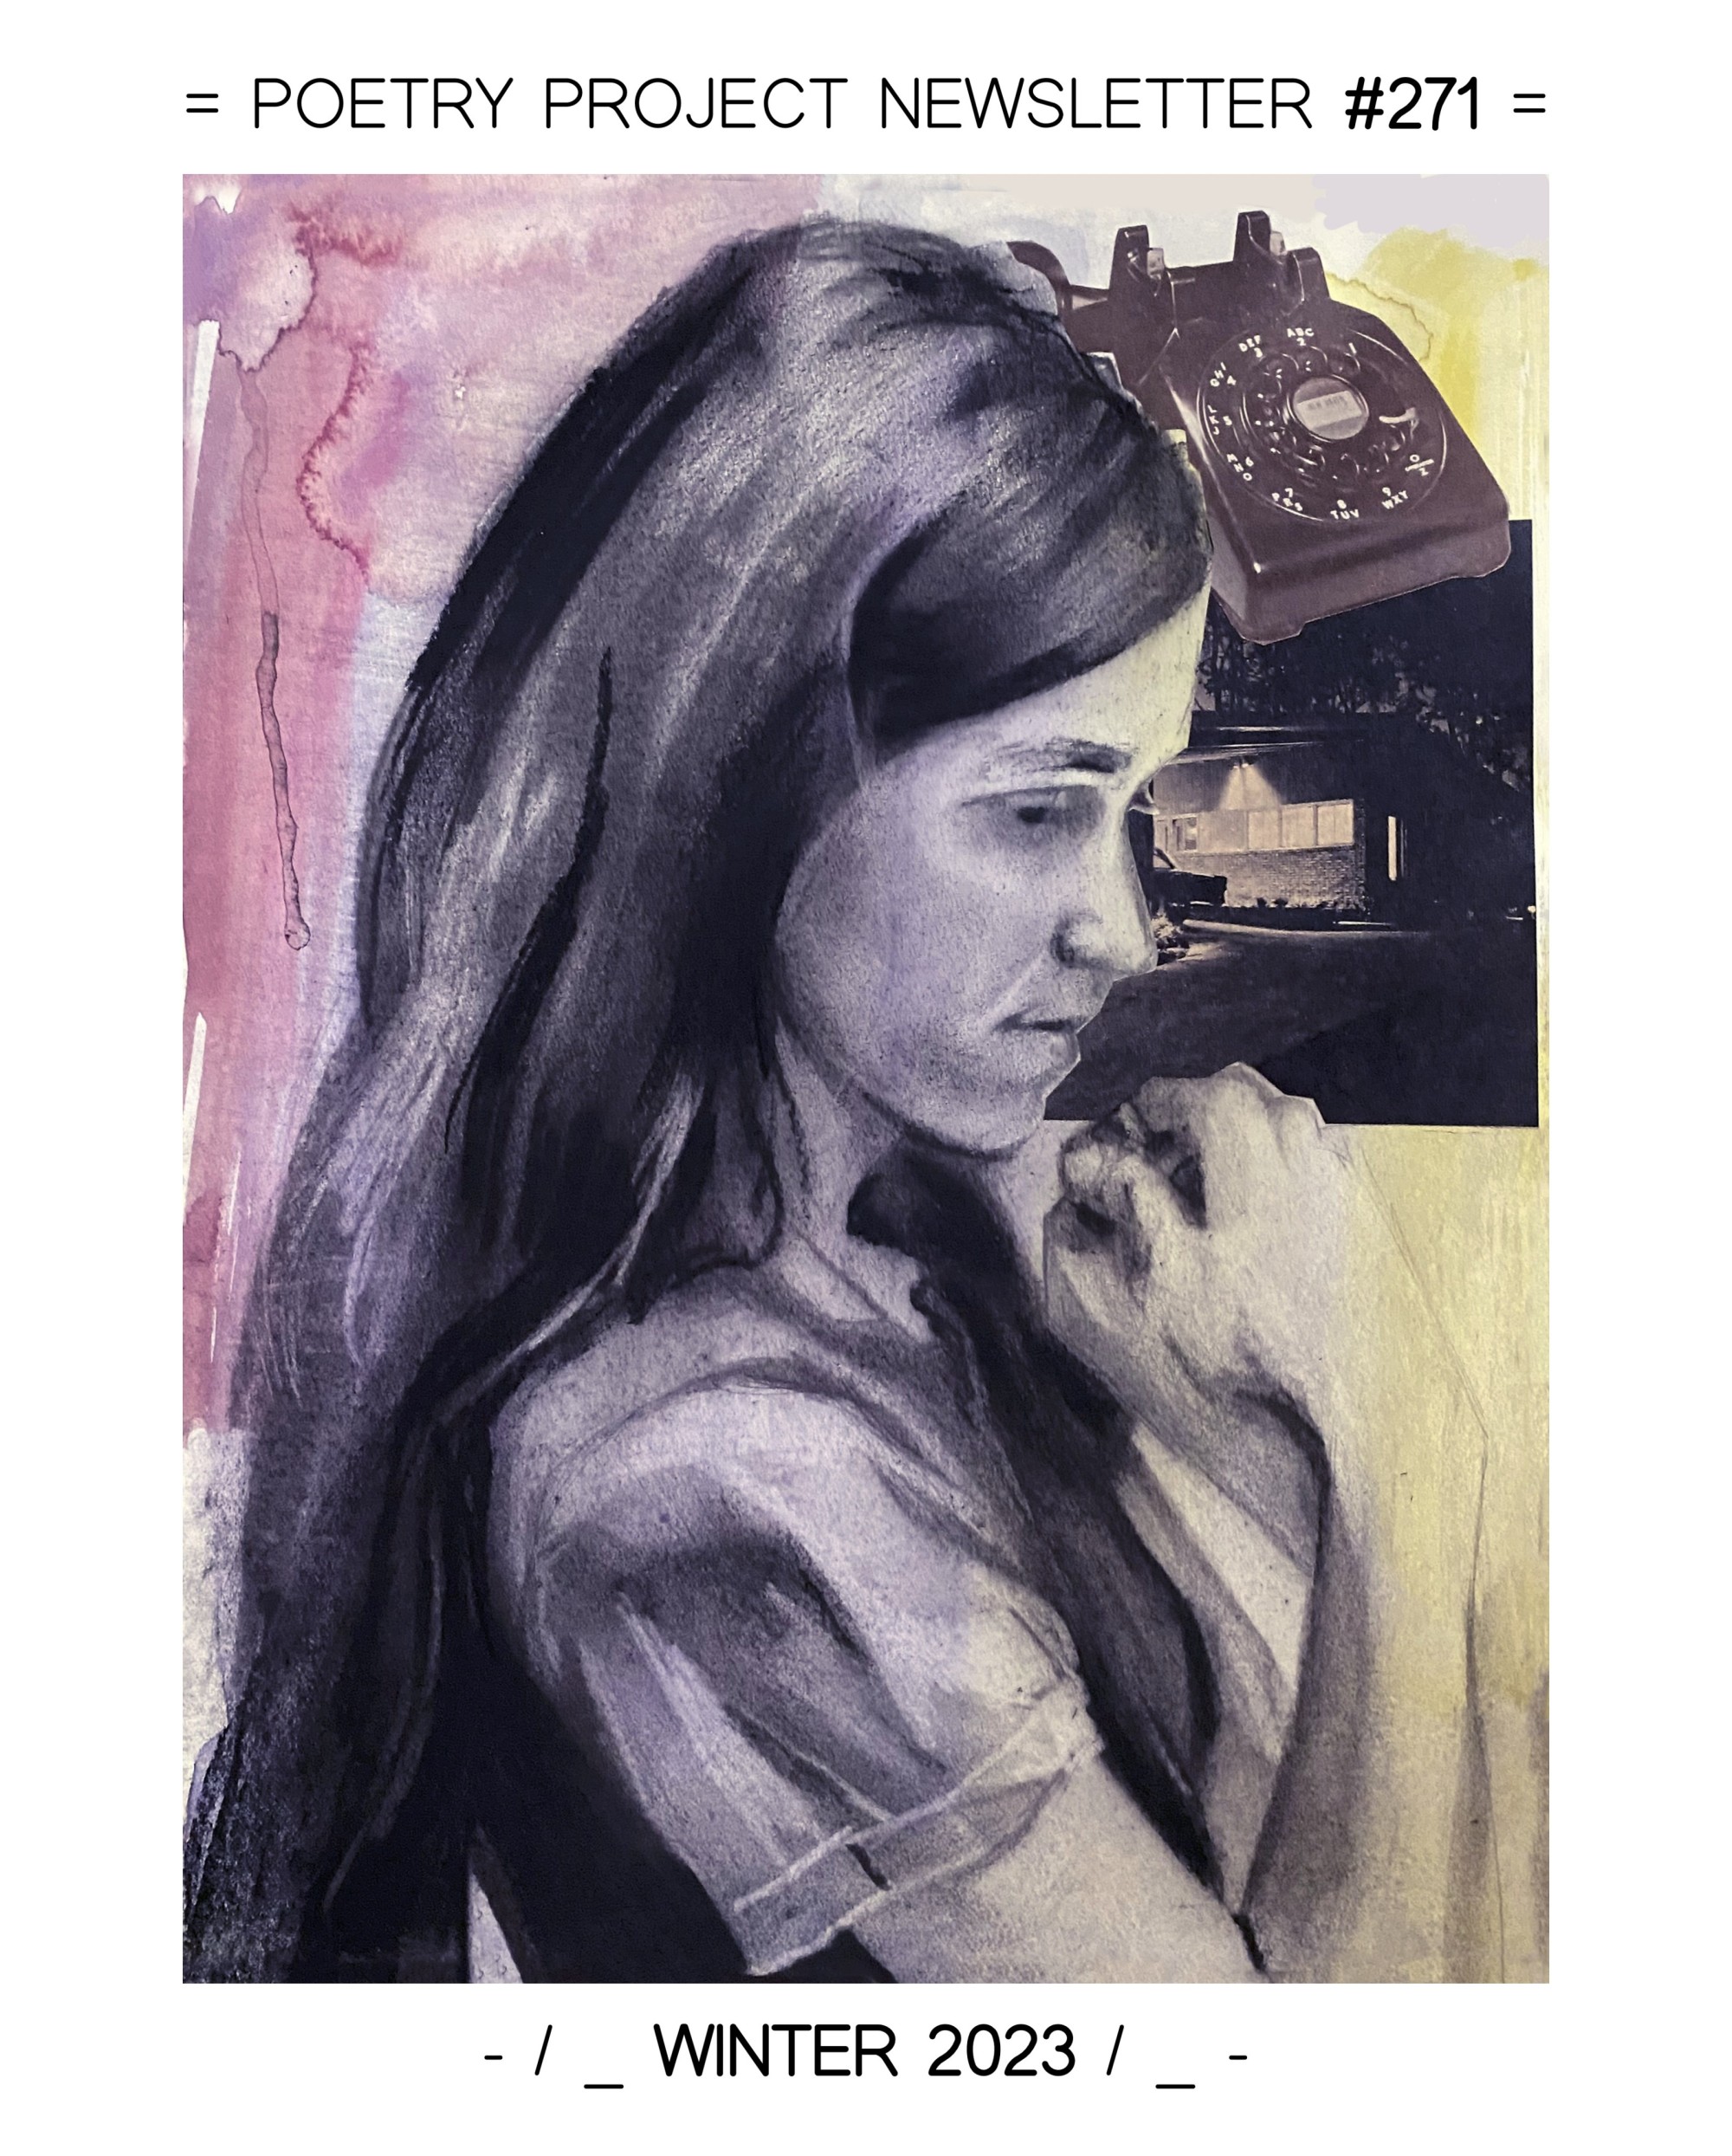 A portrait of Bernadette Mayer done in watercolor, charcoal, and collage. The portrait is a riff on an iconic photo of a young Mayer from her Memory series. This piece features Mayer in grayscale, against a background of red and yellow wash, in which is incorporated collaged images of a rotary telephone and a house with its lights on in the night.